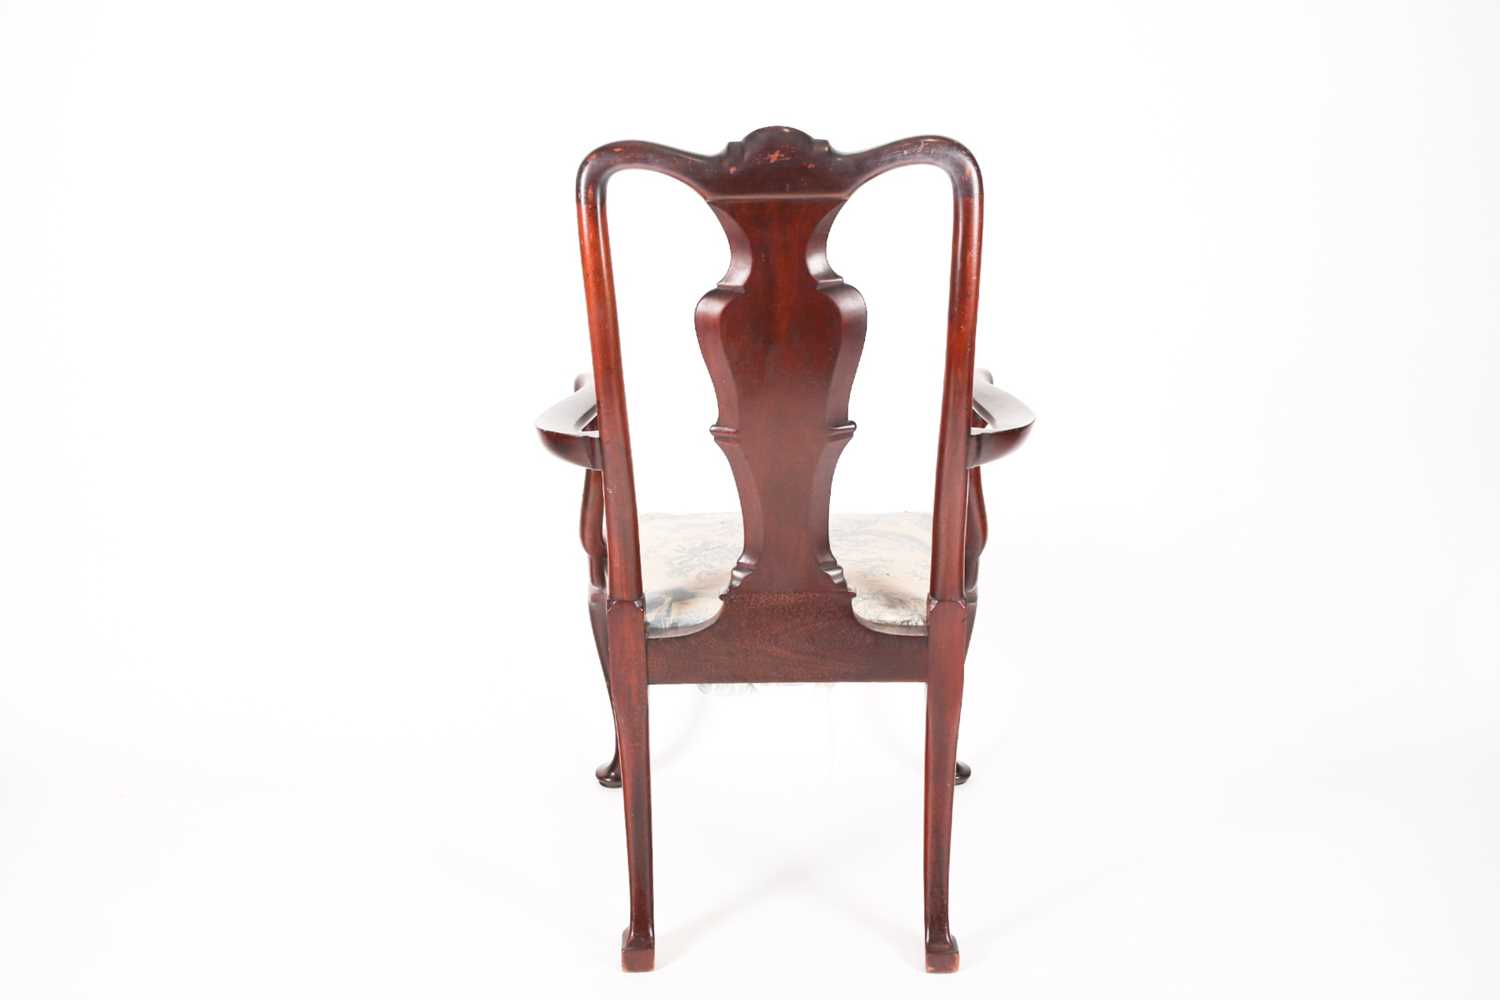 A George II style mahogany open arm carver chair with carved vase splat, crook arms above a drop - Image 4 of 6